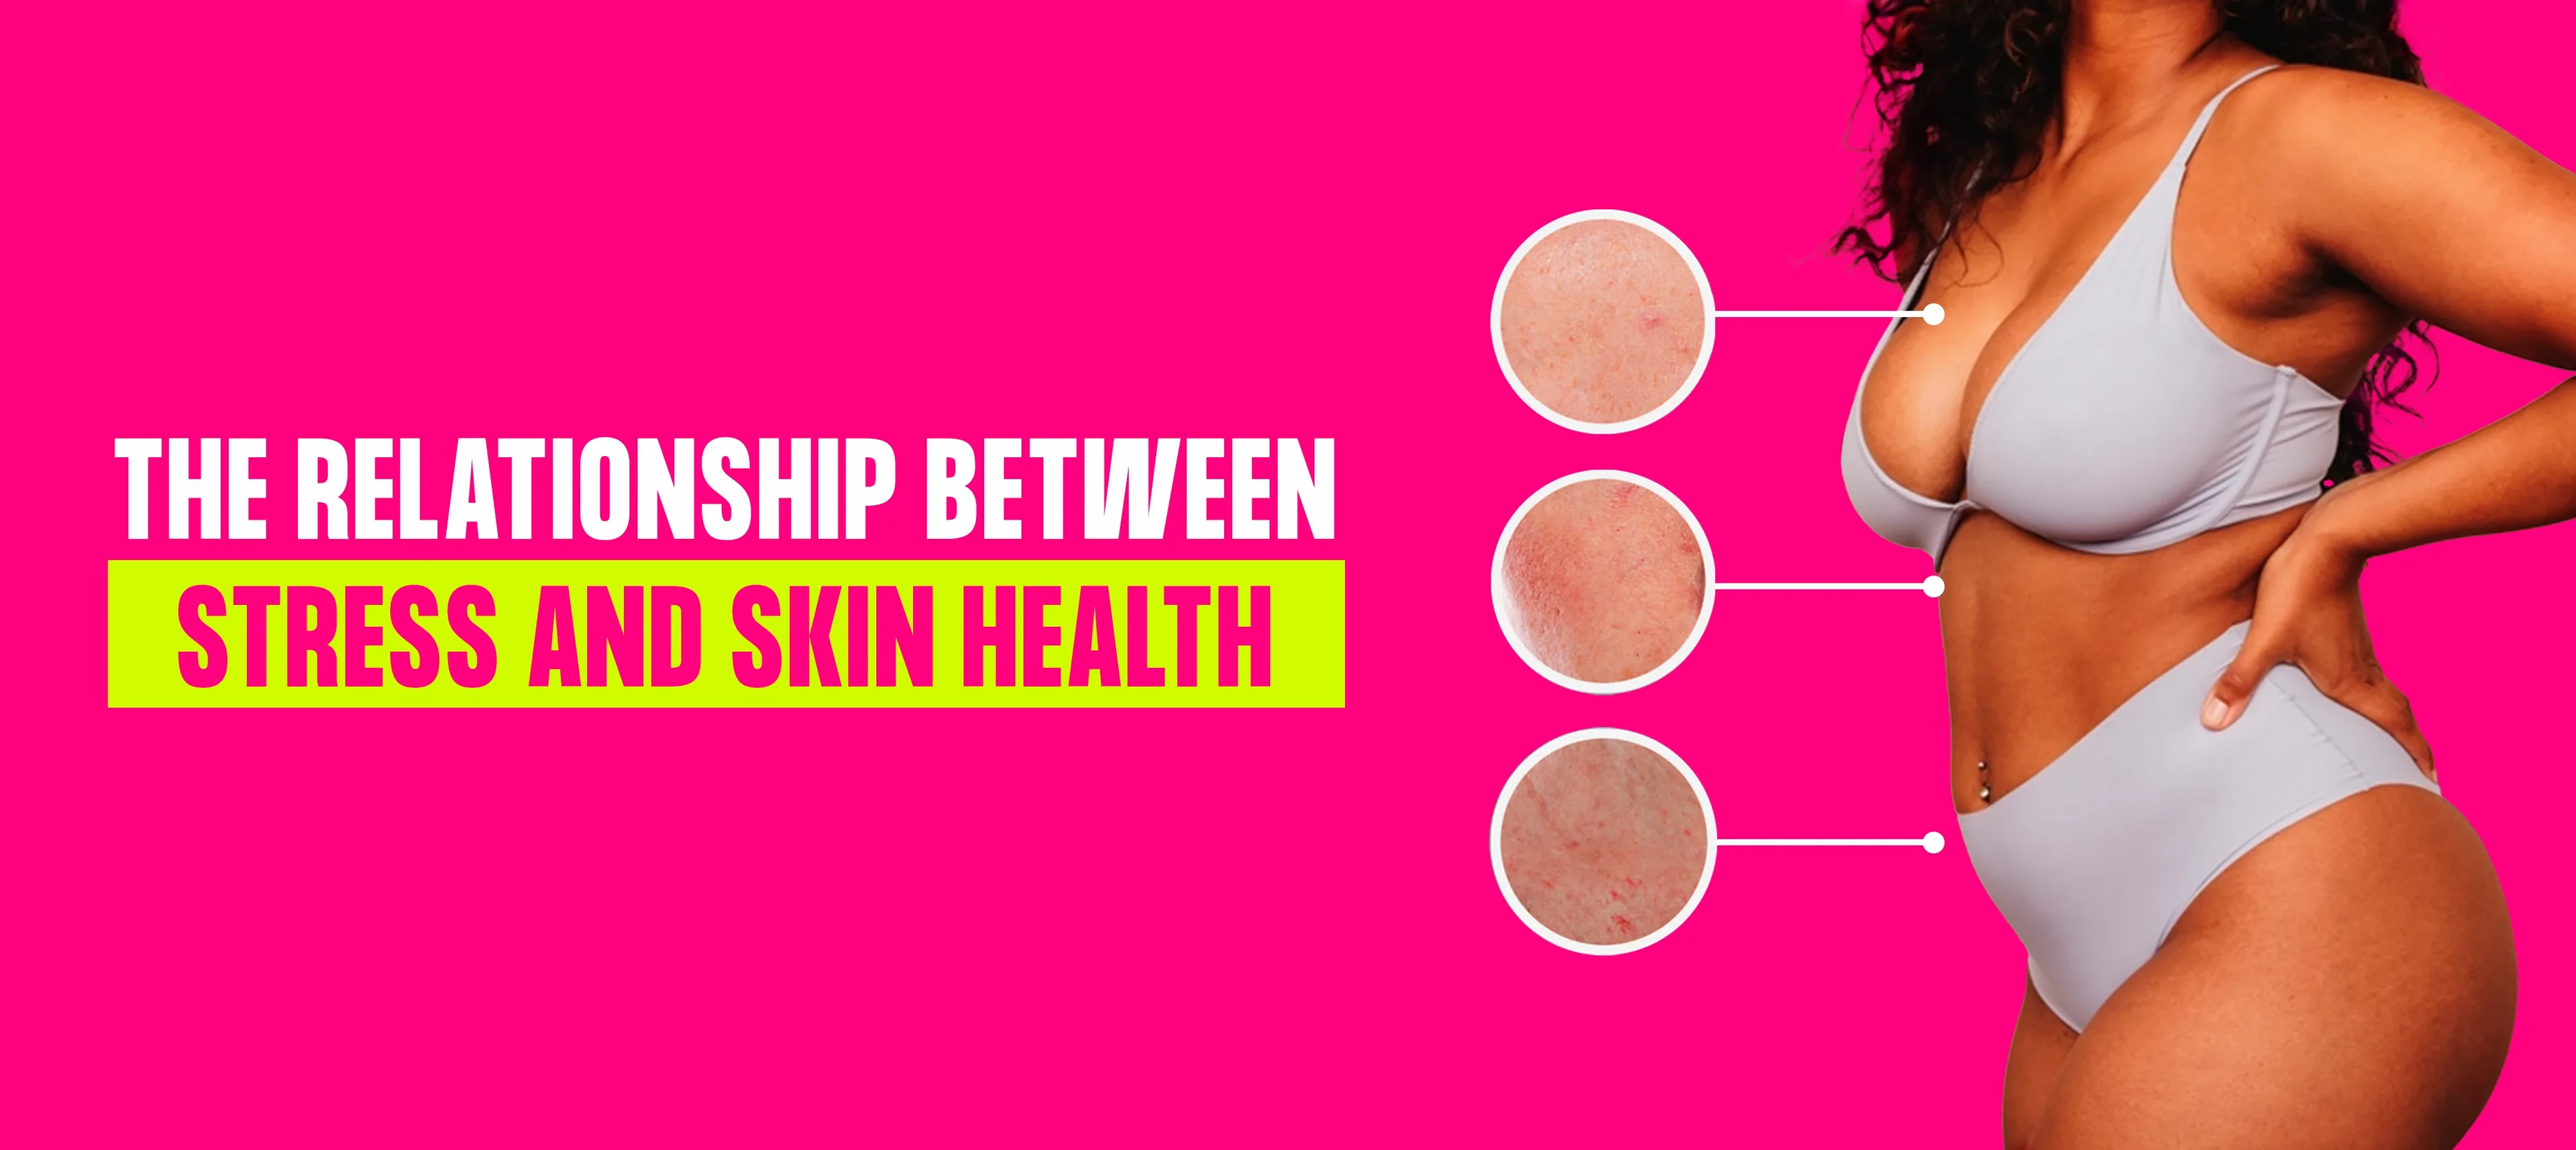 The Relationship Between Stress and Skin Health